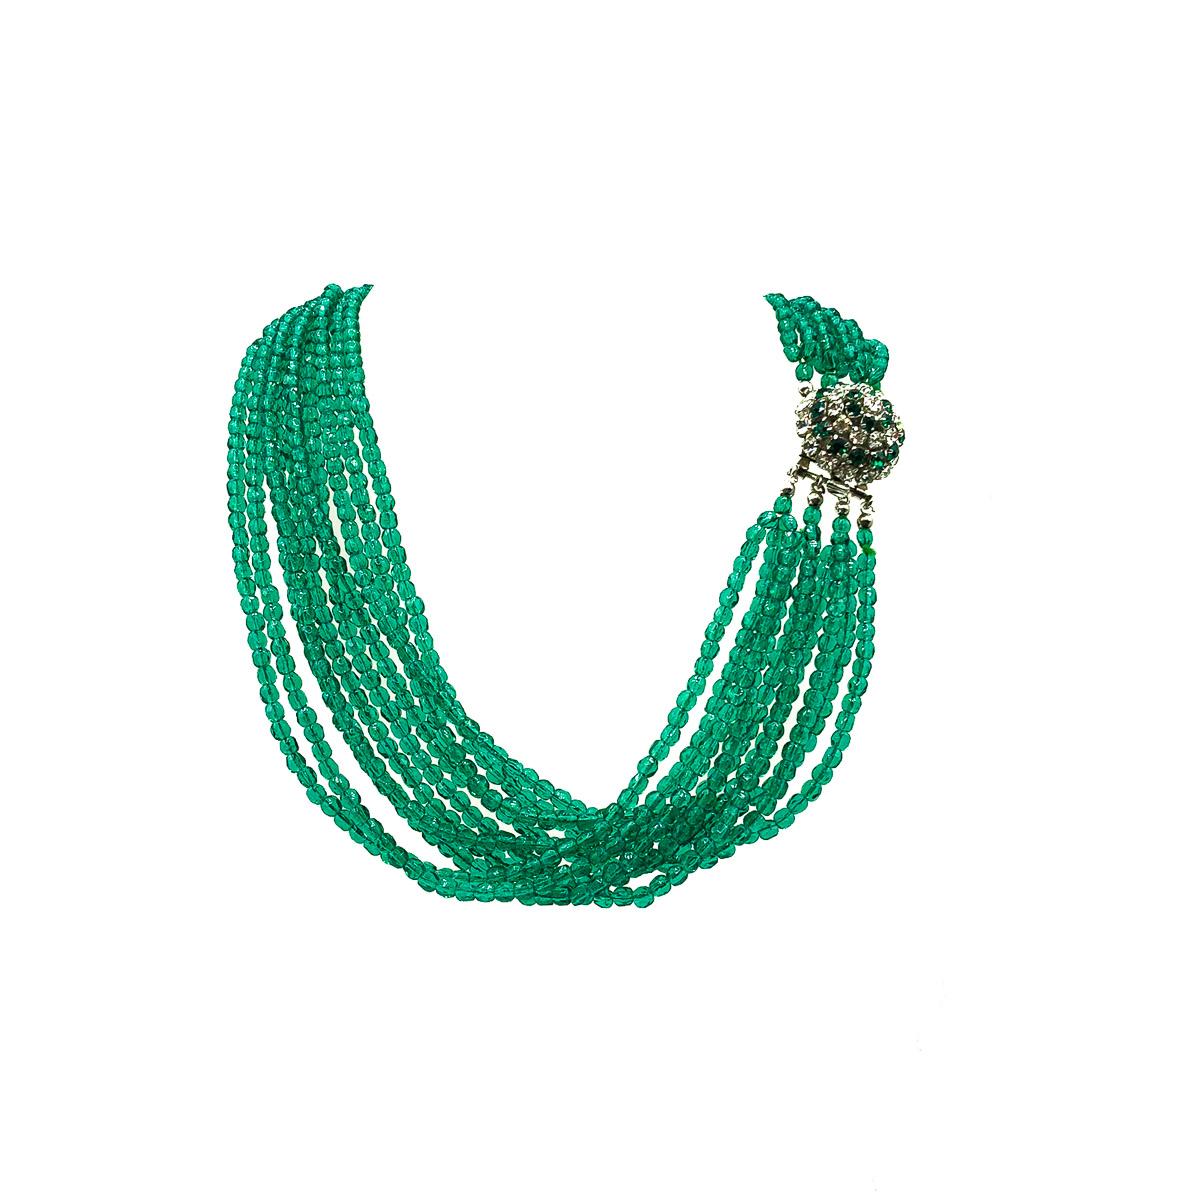 A very special Vintage 1964 Dior Torsade Collar hailing from the era of Marc Bohan at the Head of Dior's design. Crafted with hundreds and hundreds of emerald green glass faceted beads creating four triple strands for that timelessly chic torsade